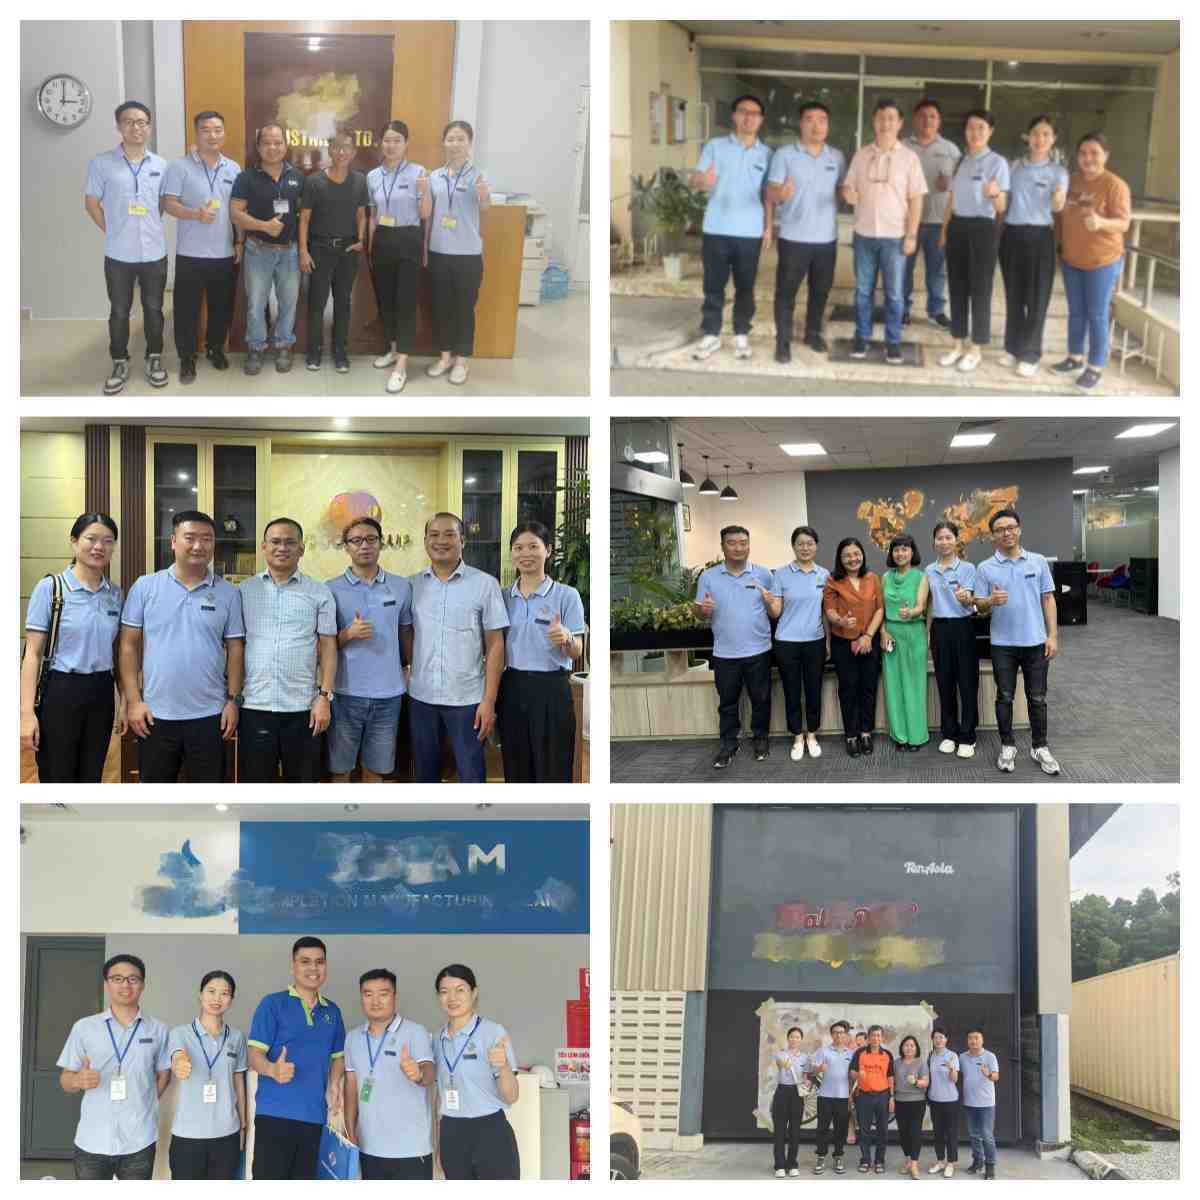 Our Business Trip to Southeast Asia: Visiting Customers and Exploring Opportunities